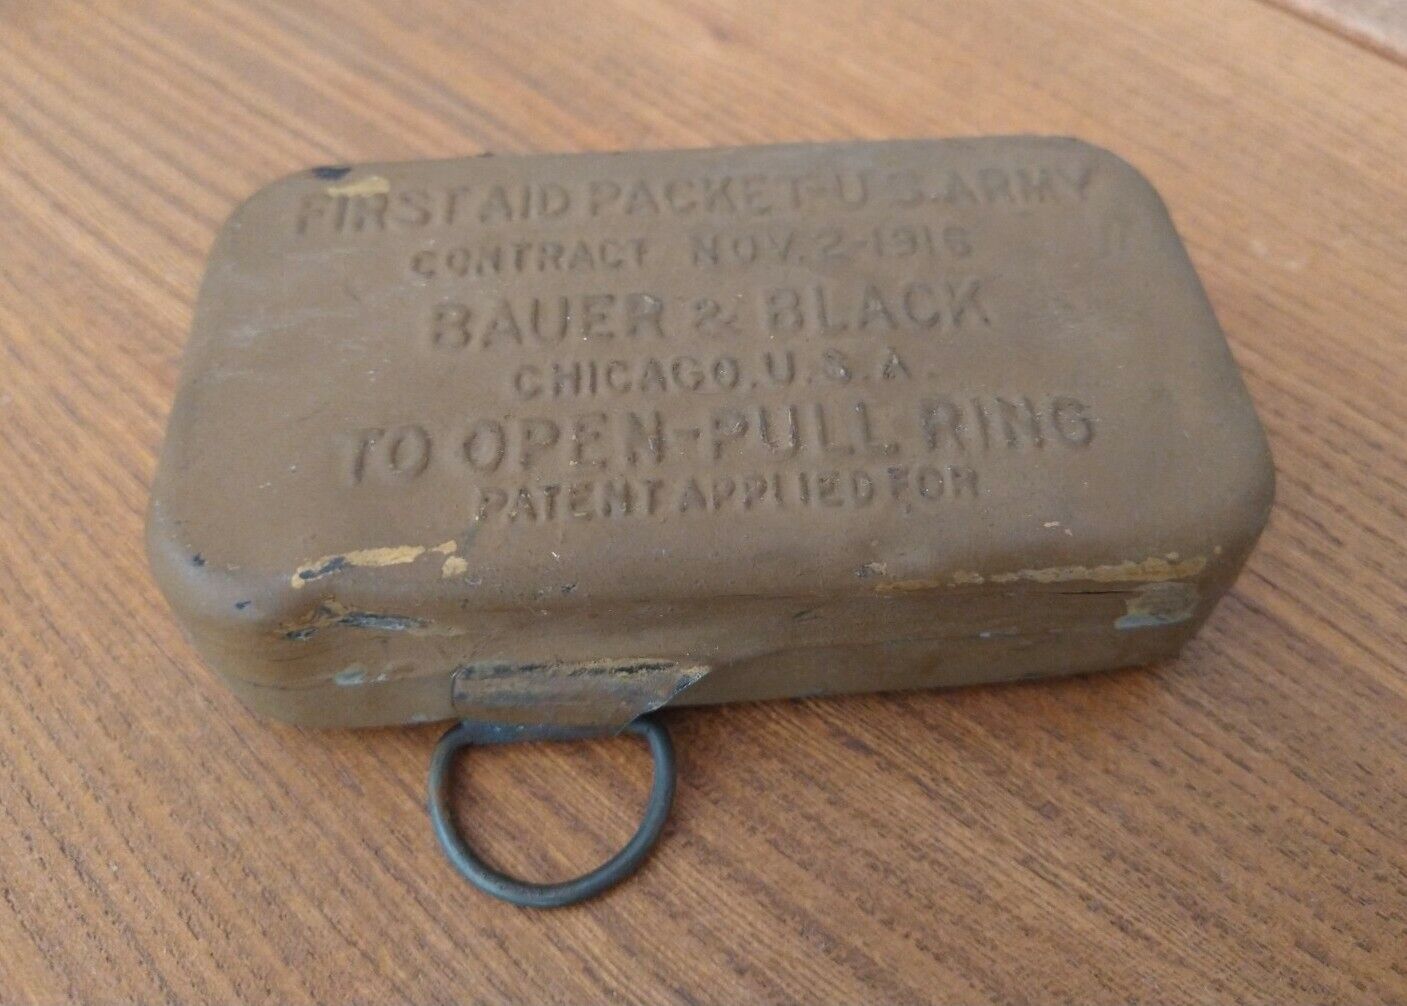 WW1 1916 Bauer & Black US Army First Aid Packet War Issued Kit Possibly Sealed